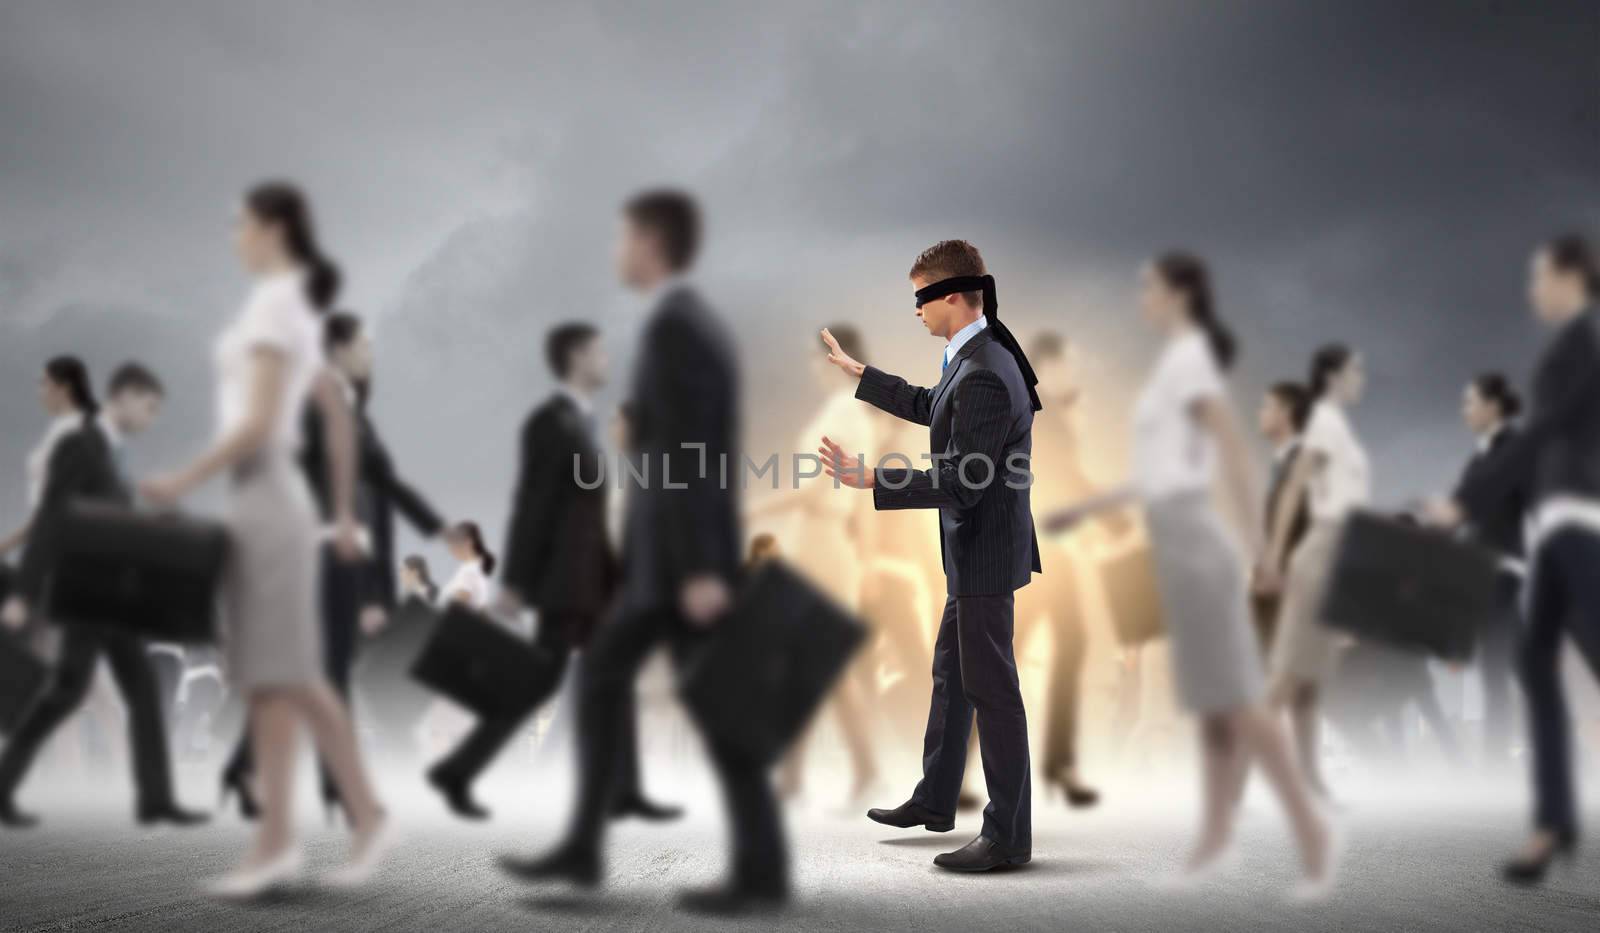 Businessman in blindfold among group of people by sergey_nivens